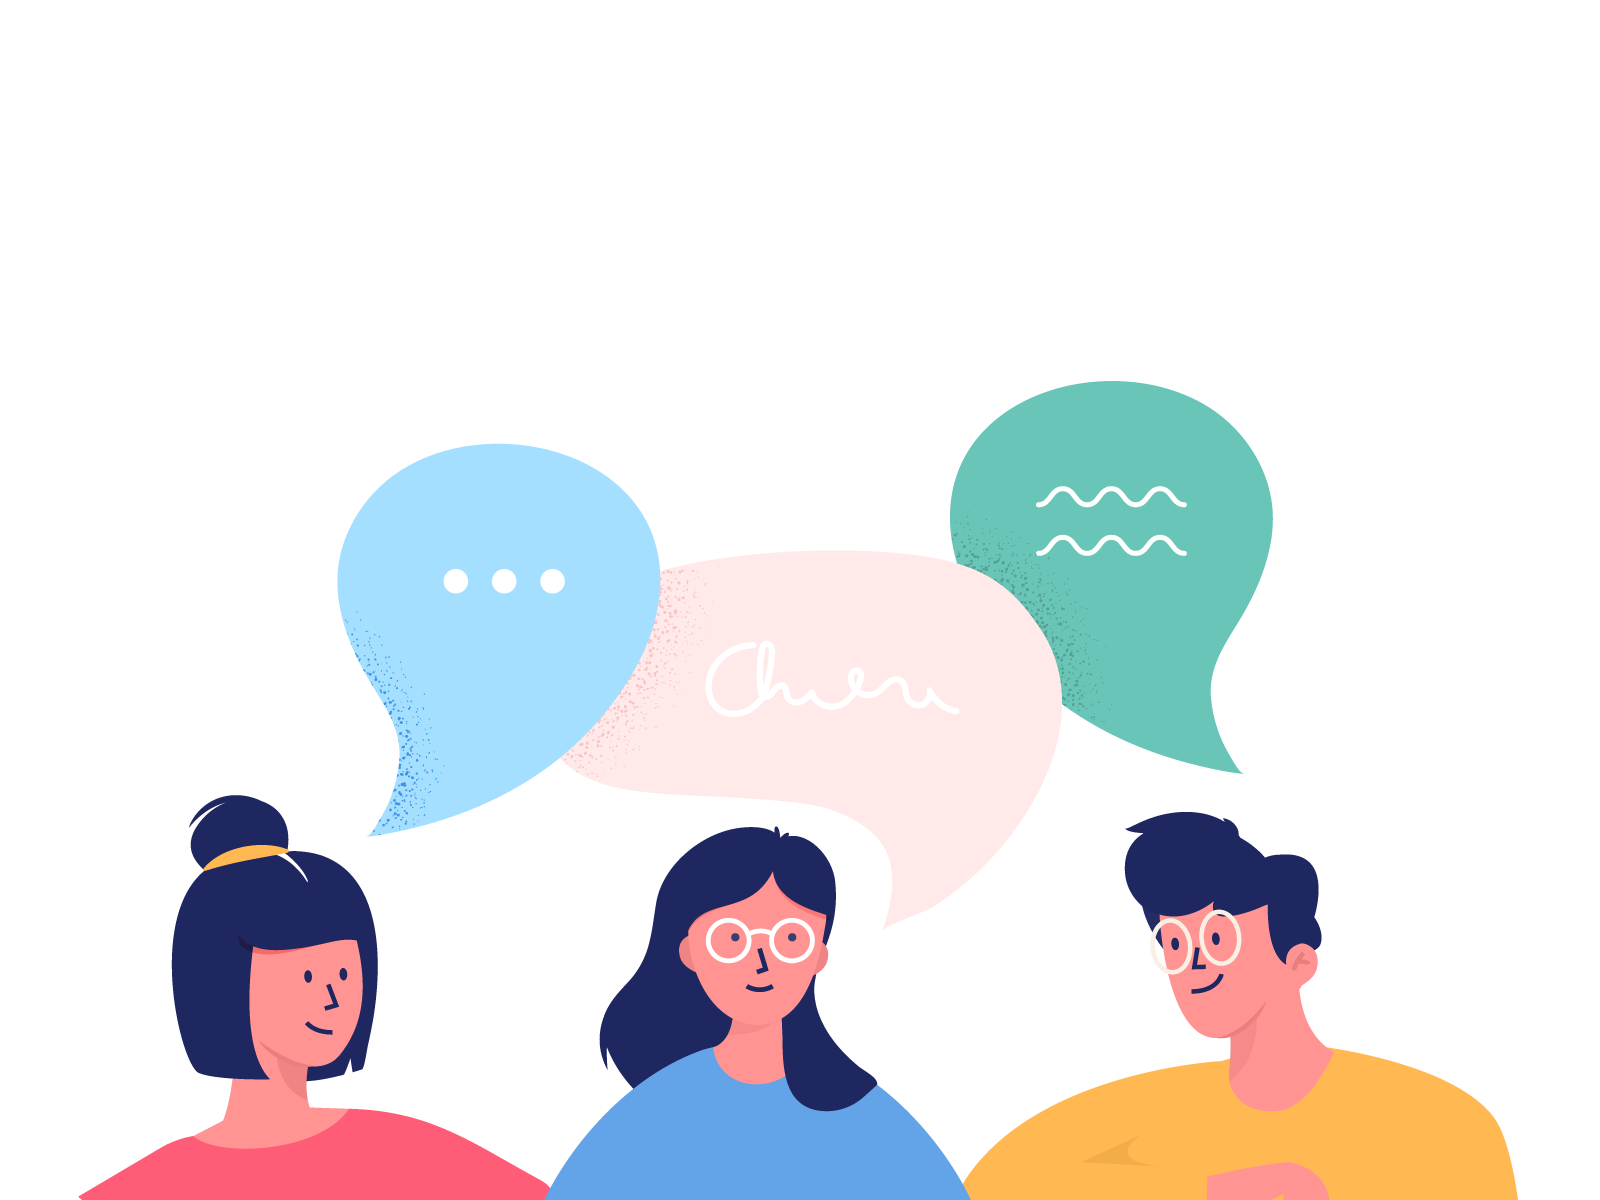 Illustration of 3 people chatting with chat bubbles.